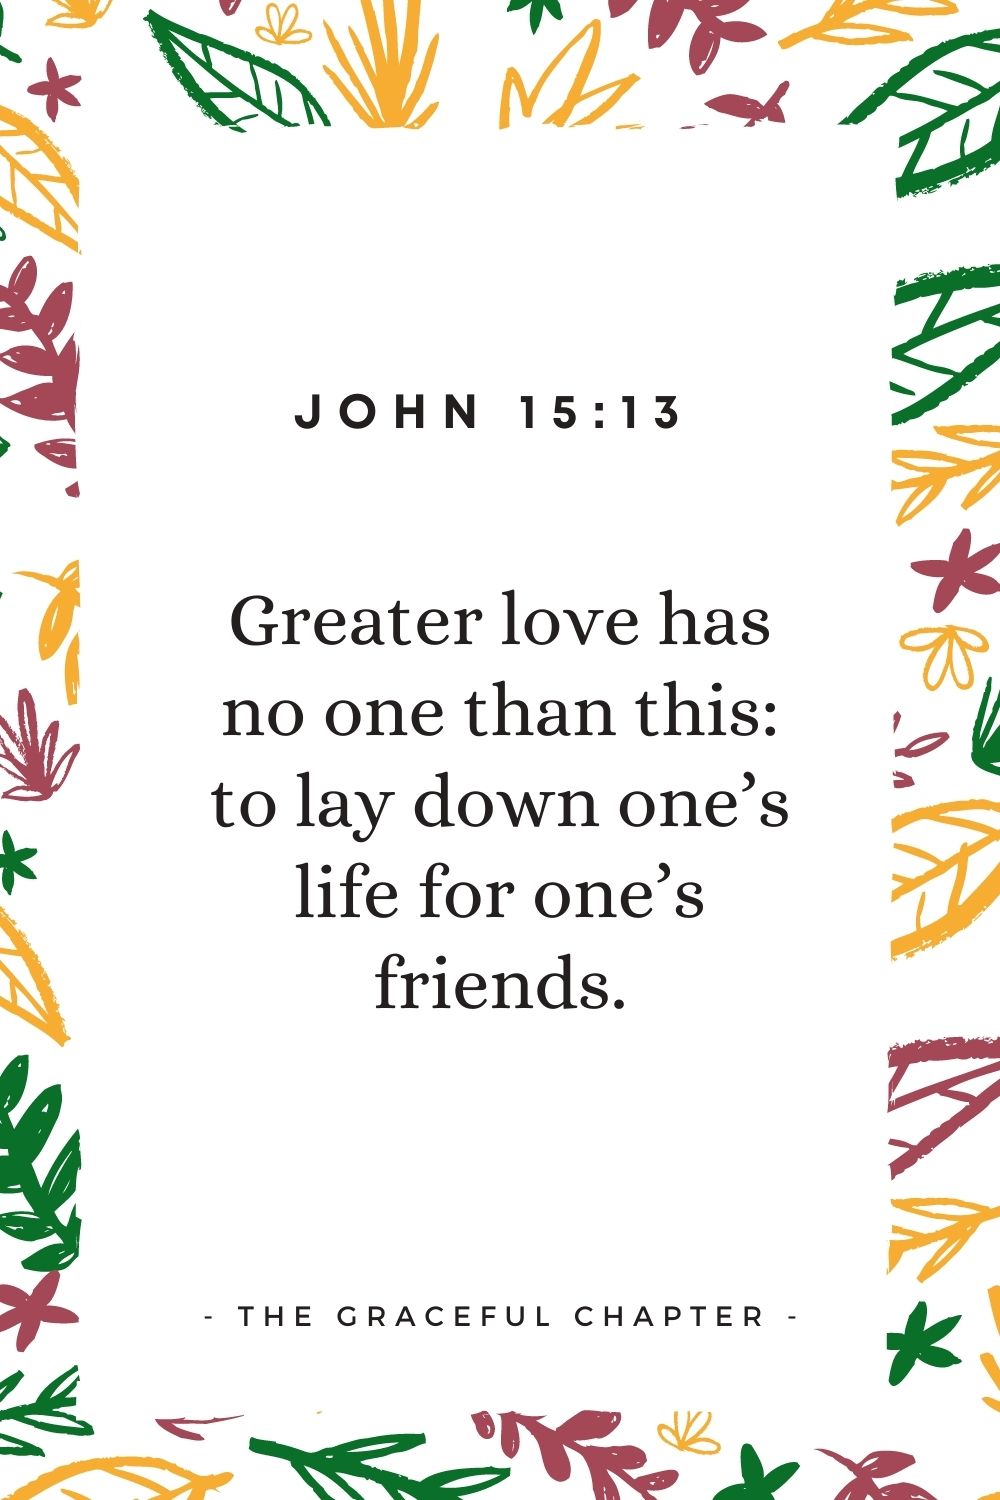 Greater love has no one than this: to lay down one’s life for one’s friends. John 15:13